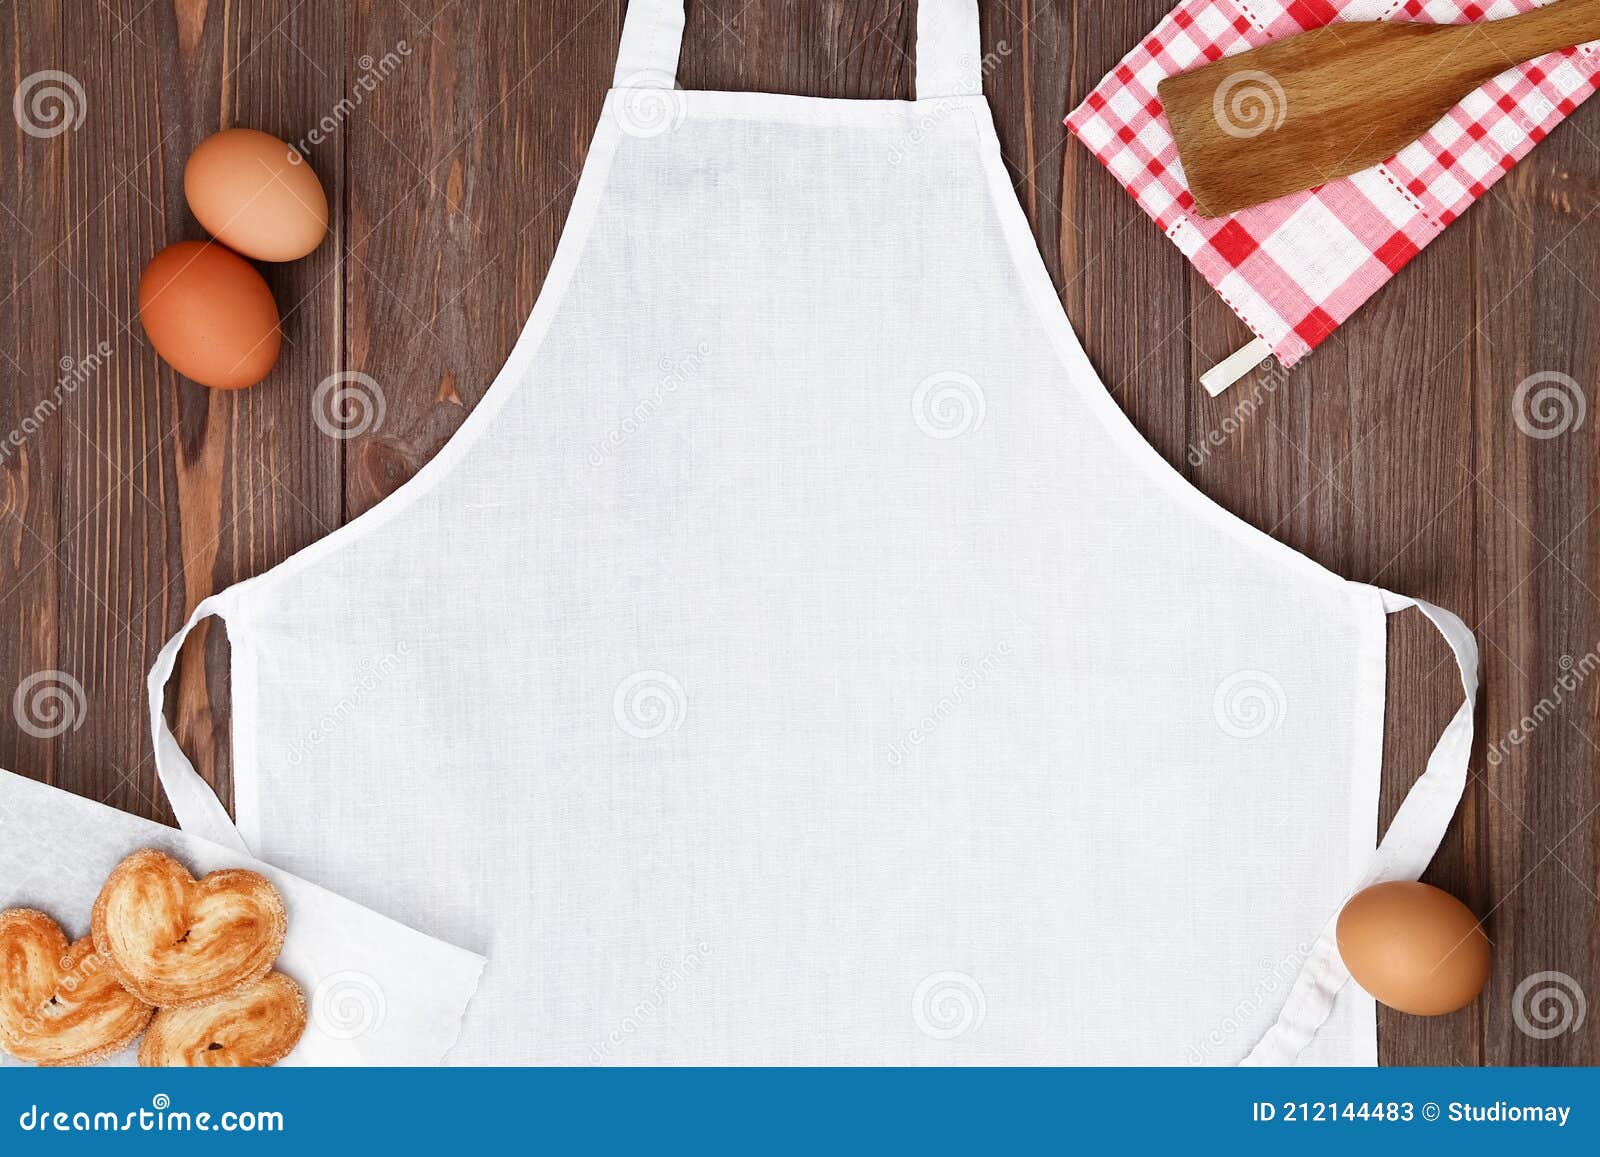 blank white apron template on wooden table with cookies and eggs, copy space. kitchen, cooking clothing mockup